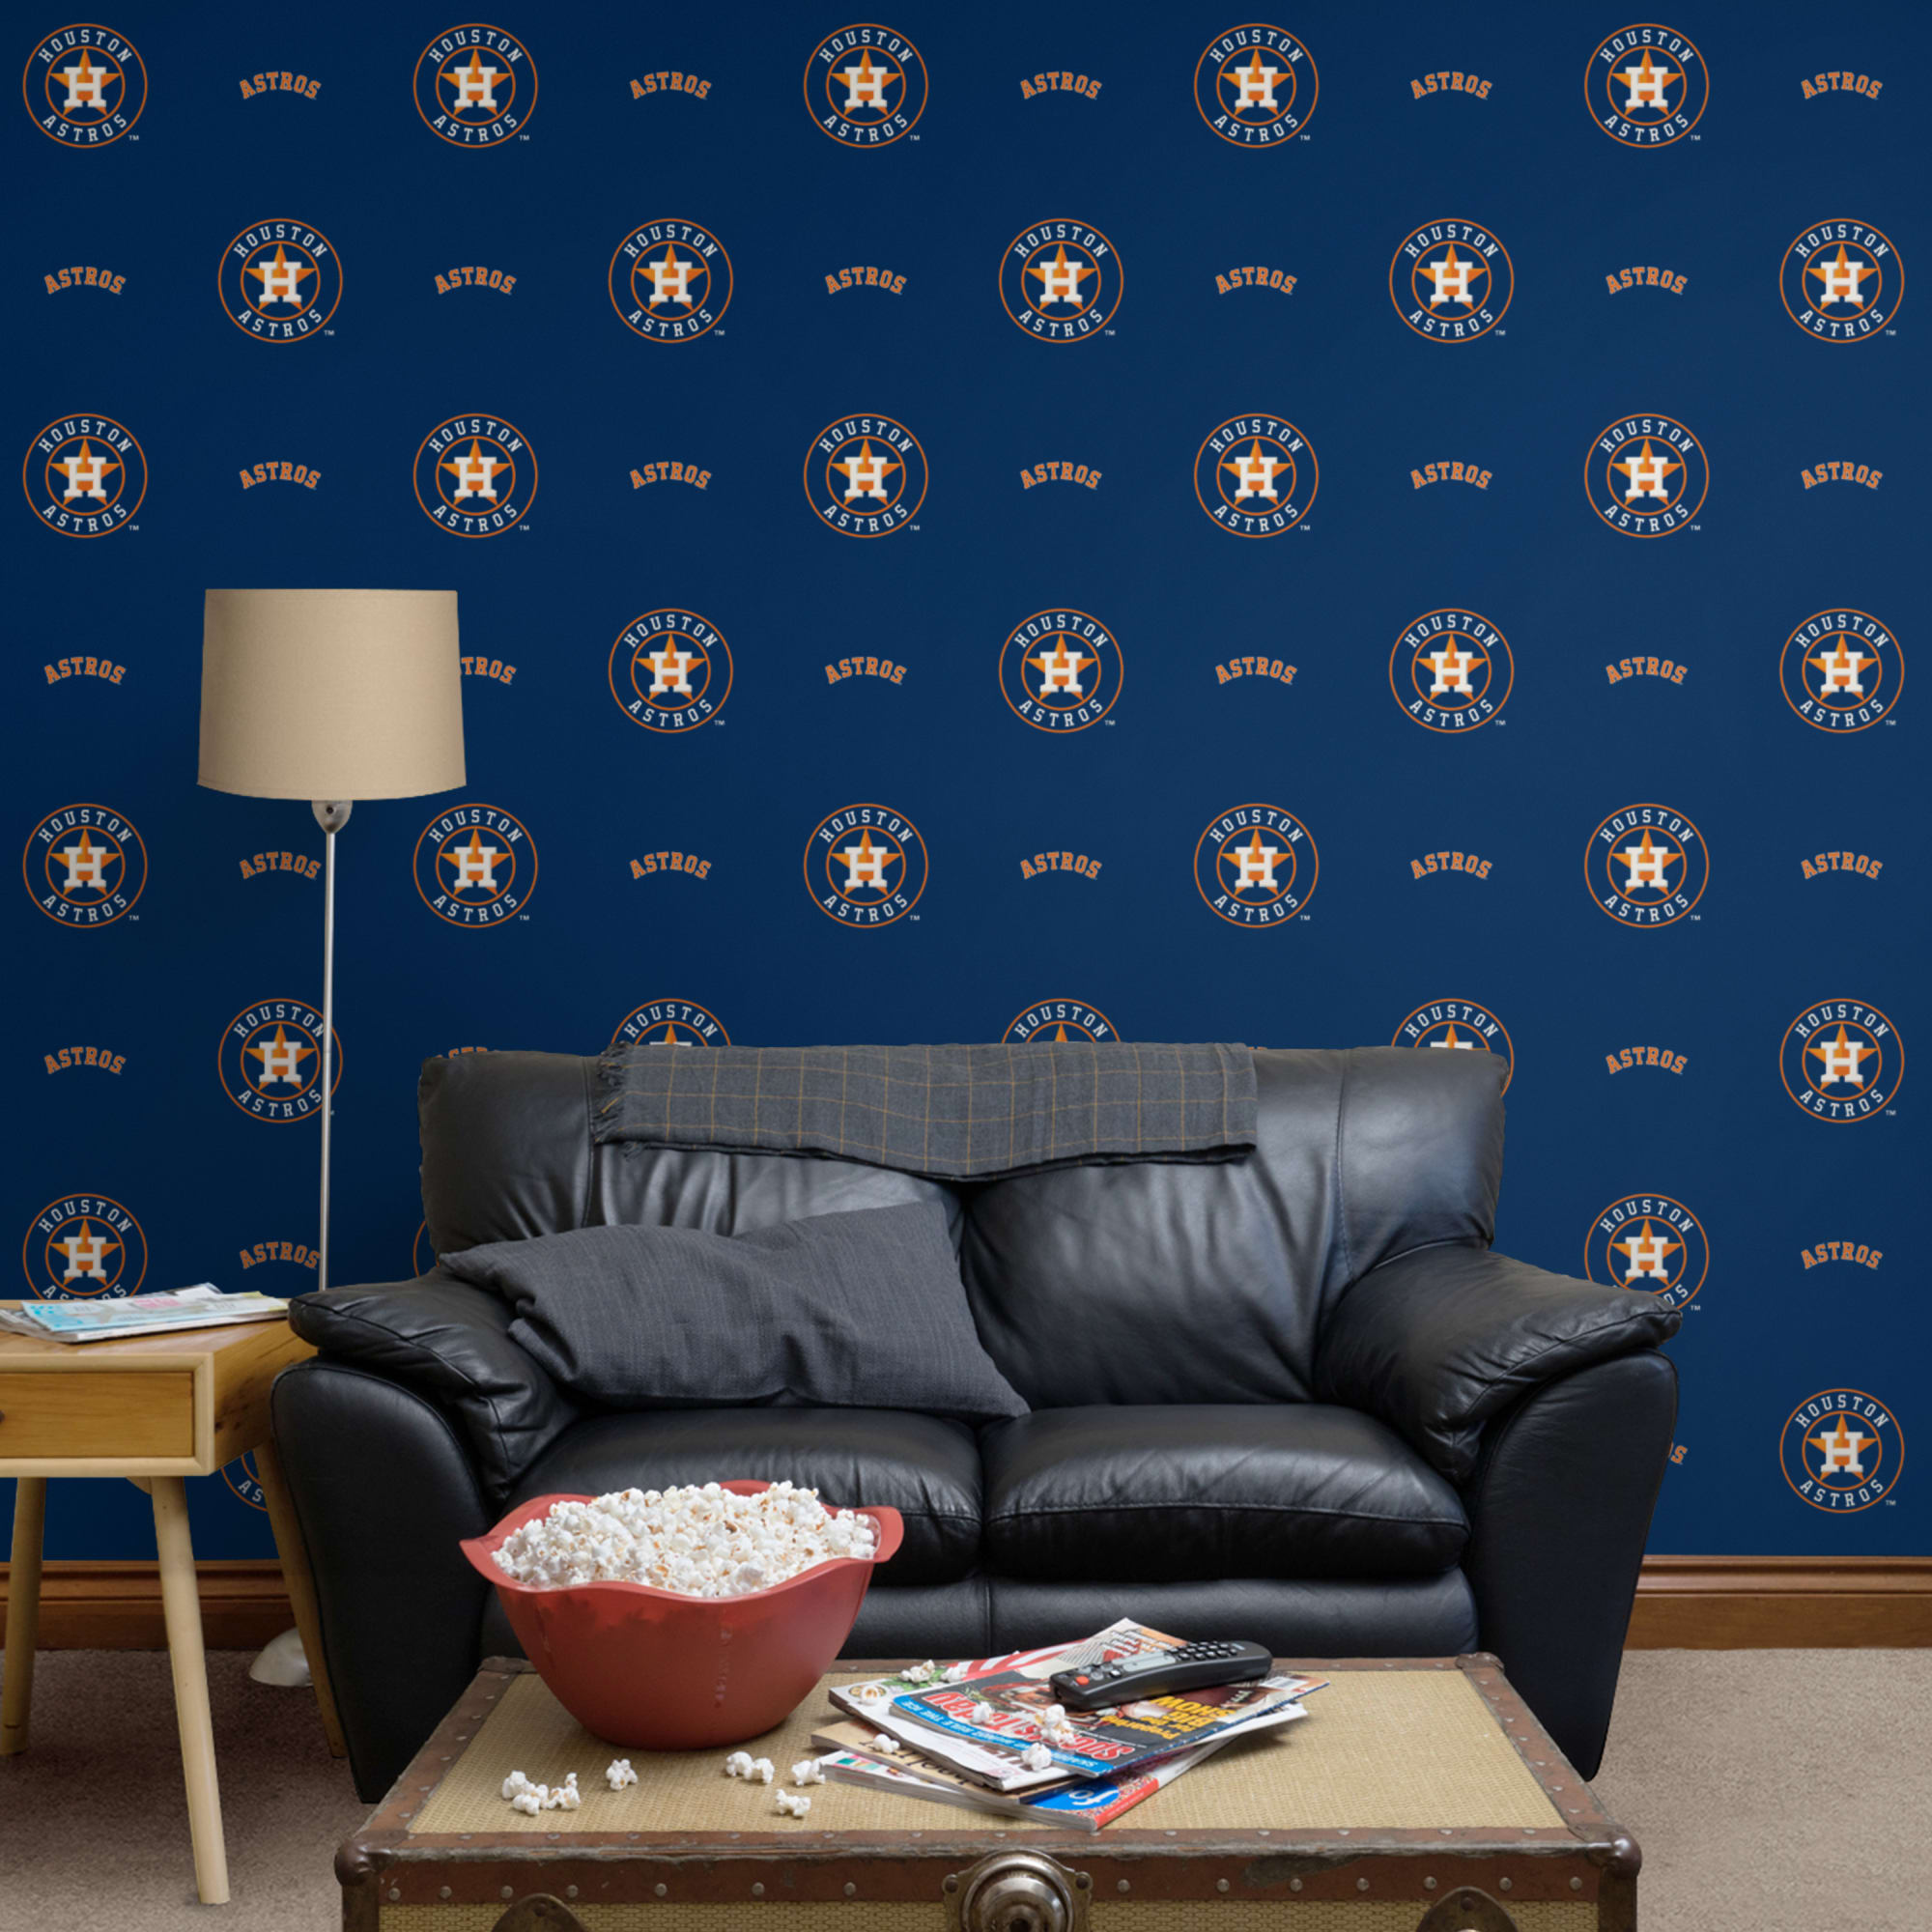 Houston Astros: Logo Pattern - Officially Licensed Removable Wallpaper 12" x 12" Sample by Fathead | 100% Vinyl